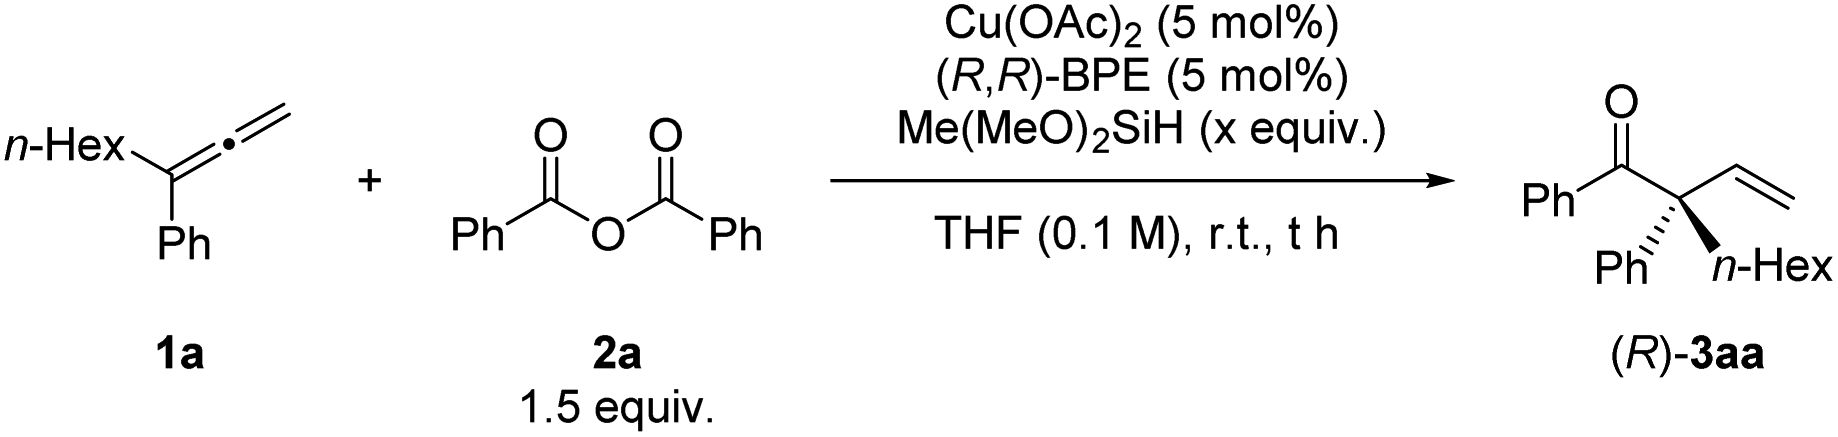 Catalytic Enantioselective Allene Anhydride Approach To B G Unsaturated Enones Bearing An A All Carbon Quarternary Center Chemical Science Rsc Publishing Doi 10 1039 D0sca